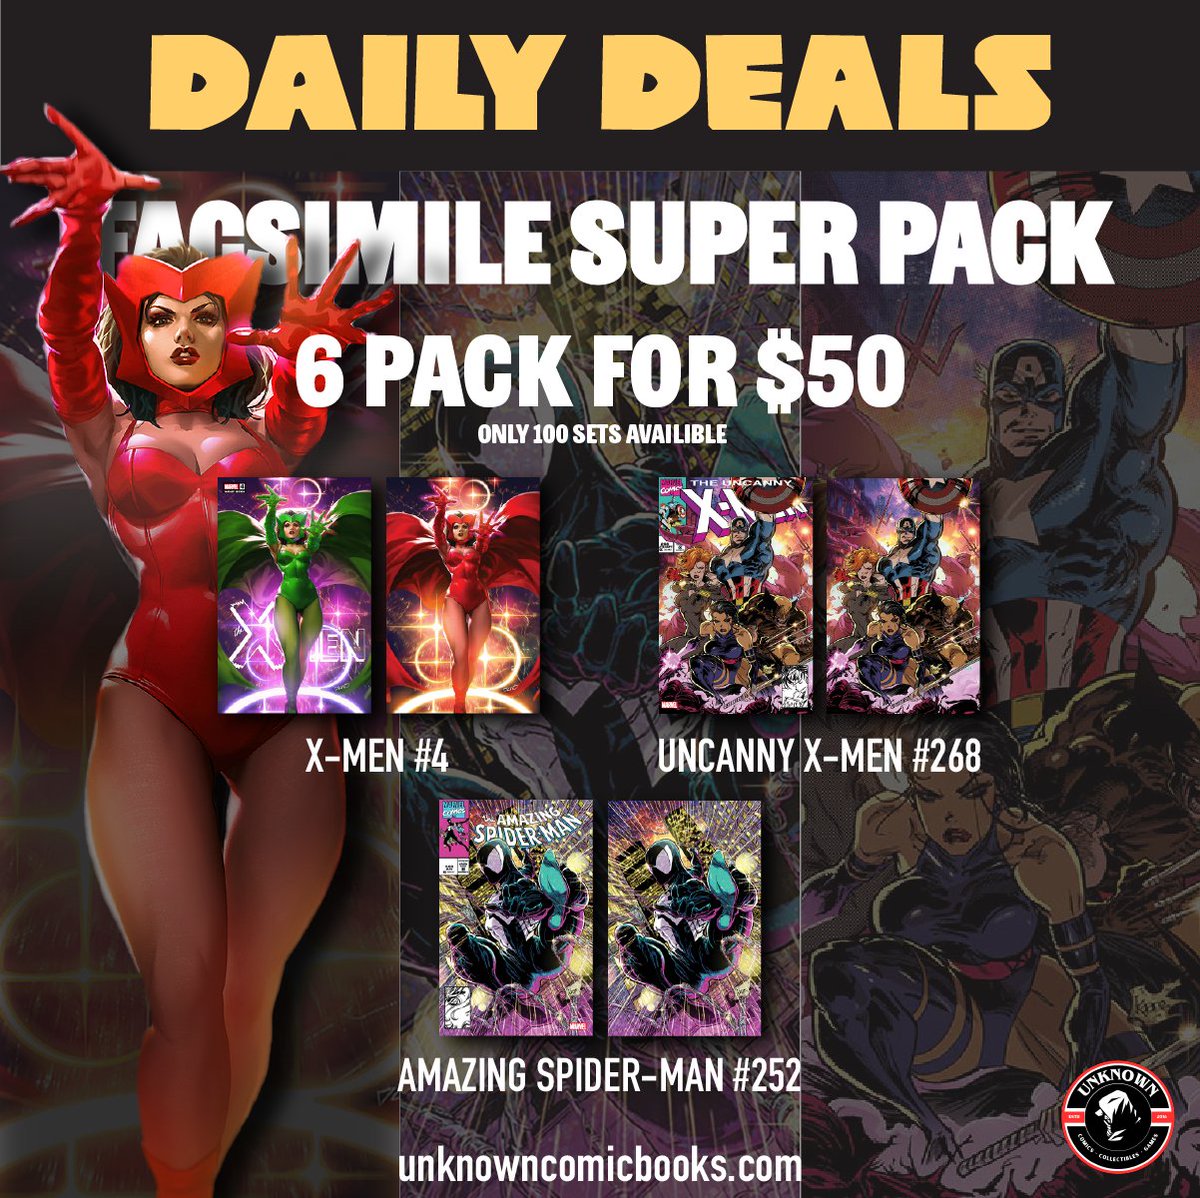 6 for the price of (basically) none!  Facsimile Super Pack (TD & Virgin) featuring X-Men #4, Uncanny X-Men #268 & Amazing Spider-Man #252 for a steal! Only 100 sets & today only! UnknownComicBooks.com #FacsimileSuperPack #LimitedTimeOffer #UnknownComics